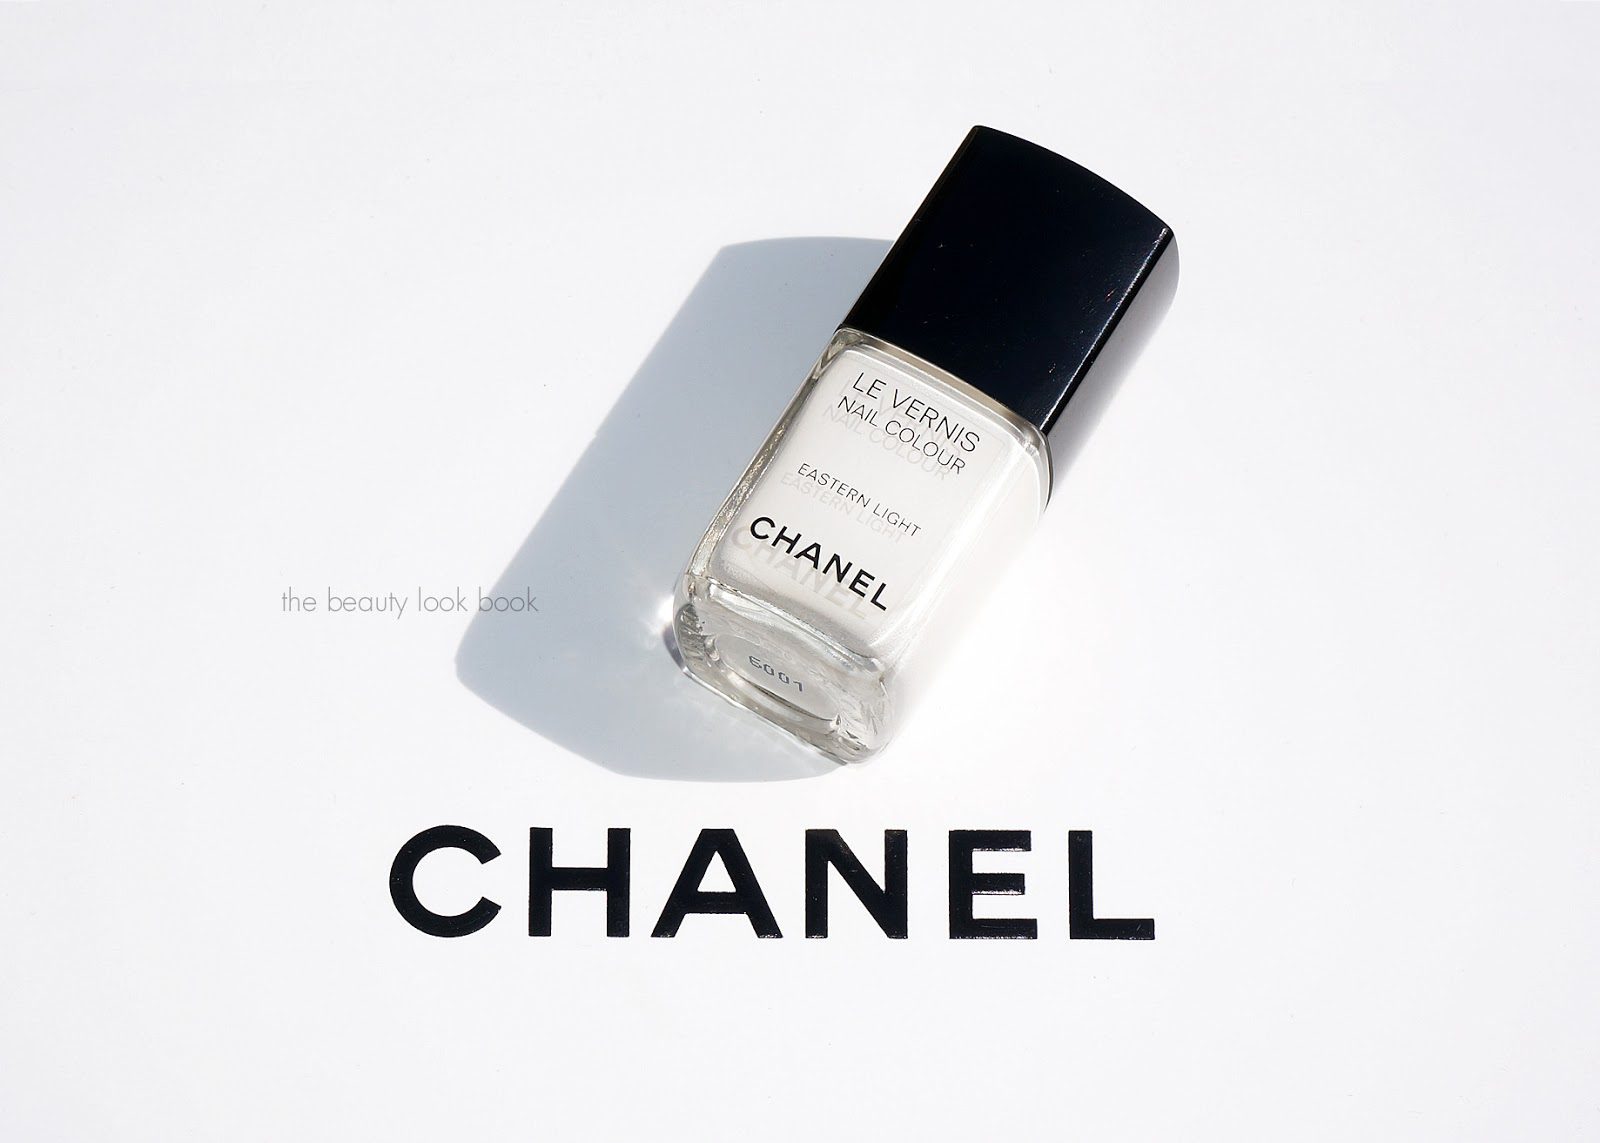 Chanel Eastern Light 613 Le Vernis - The Beauty Look Book